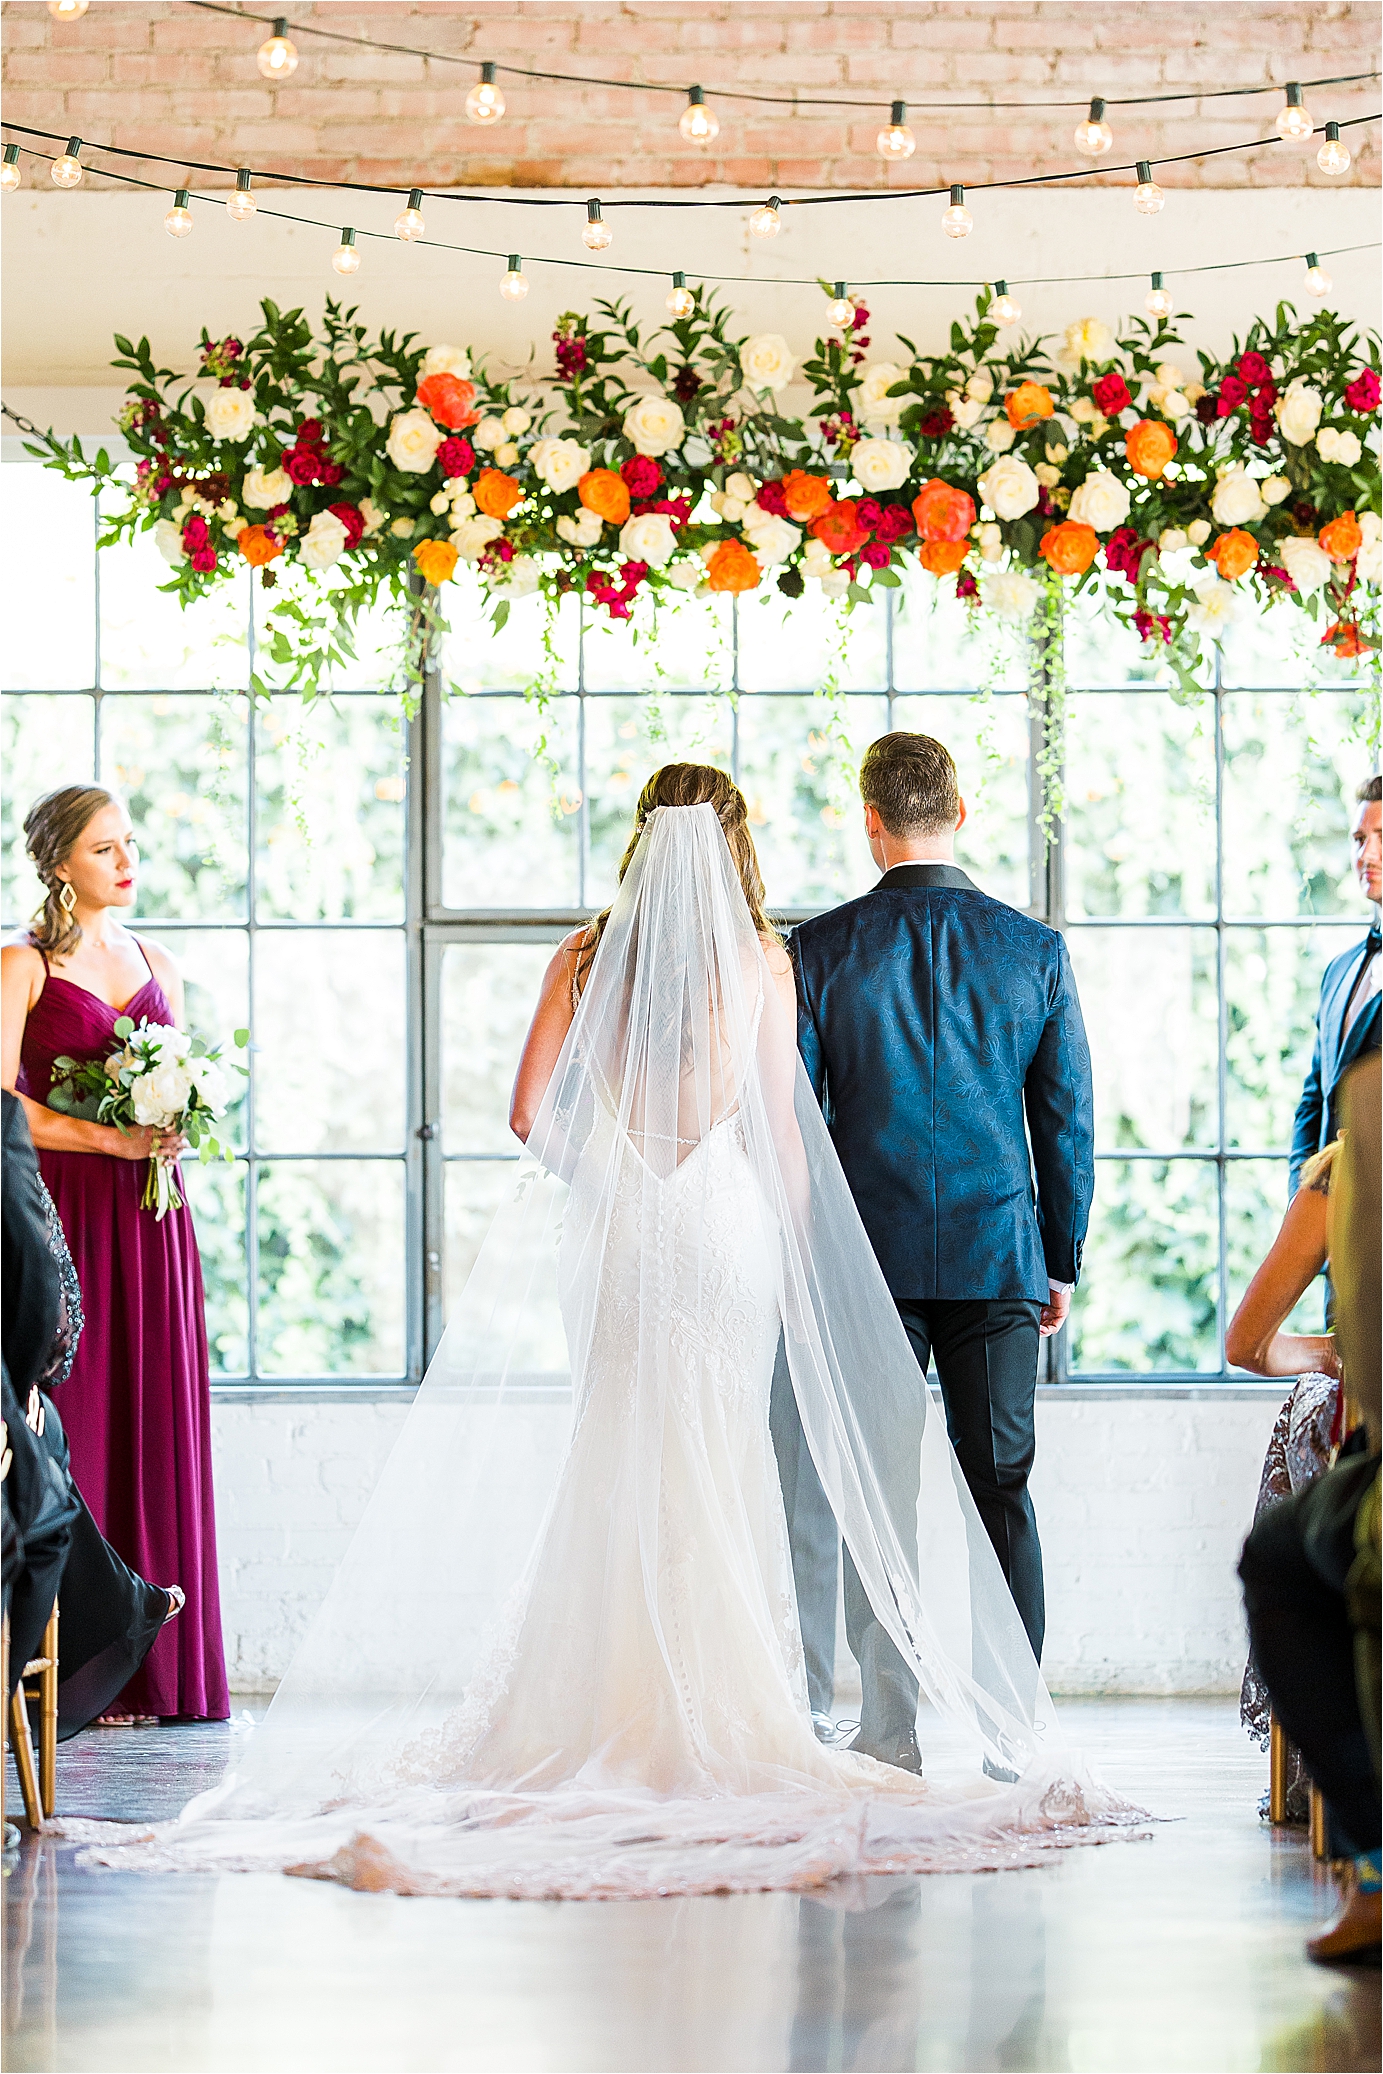 A bride and groom hold hands as you get a view of the back of the bride's dress and veil during her floral filled ceremony at Hickory Street Annex in Dallas, Texas 